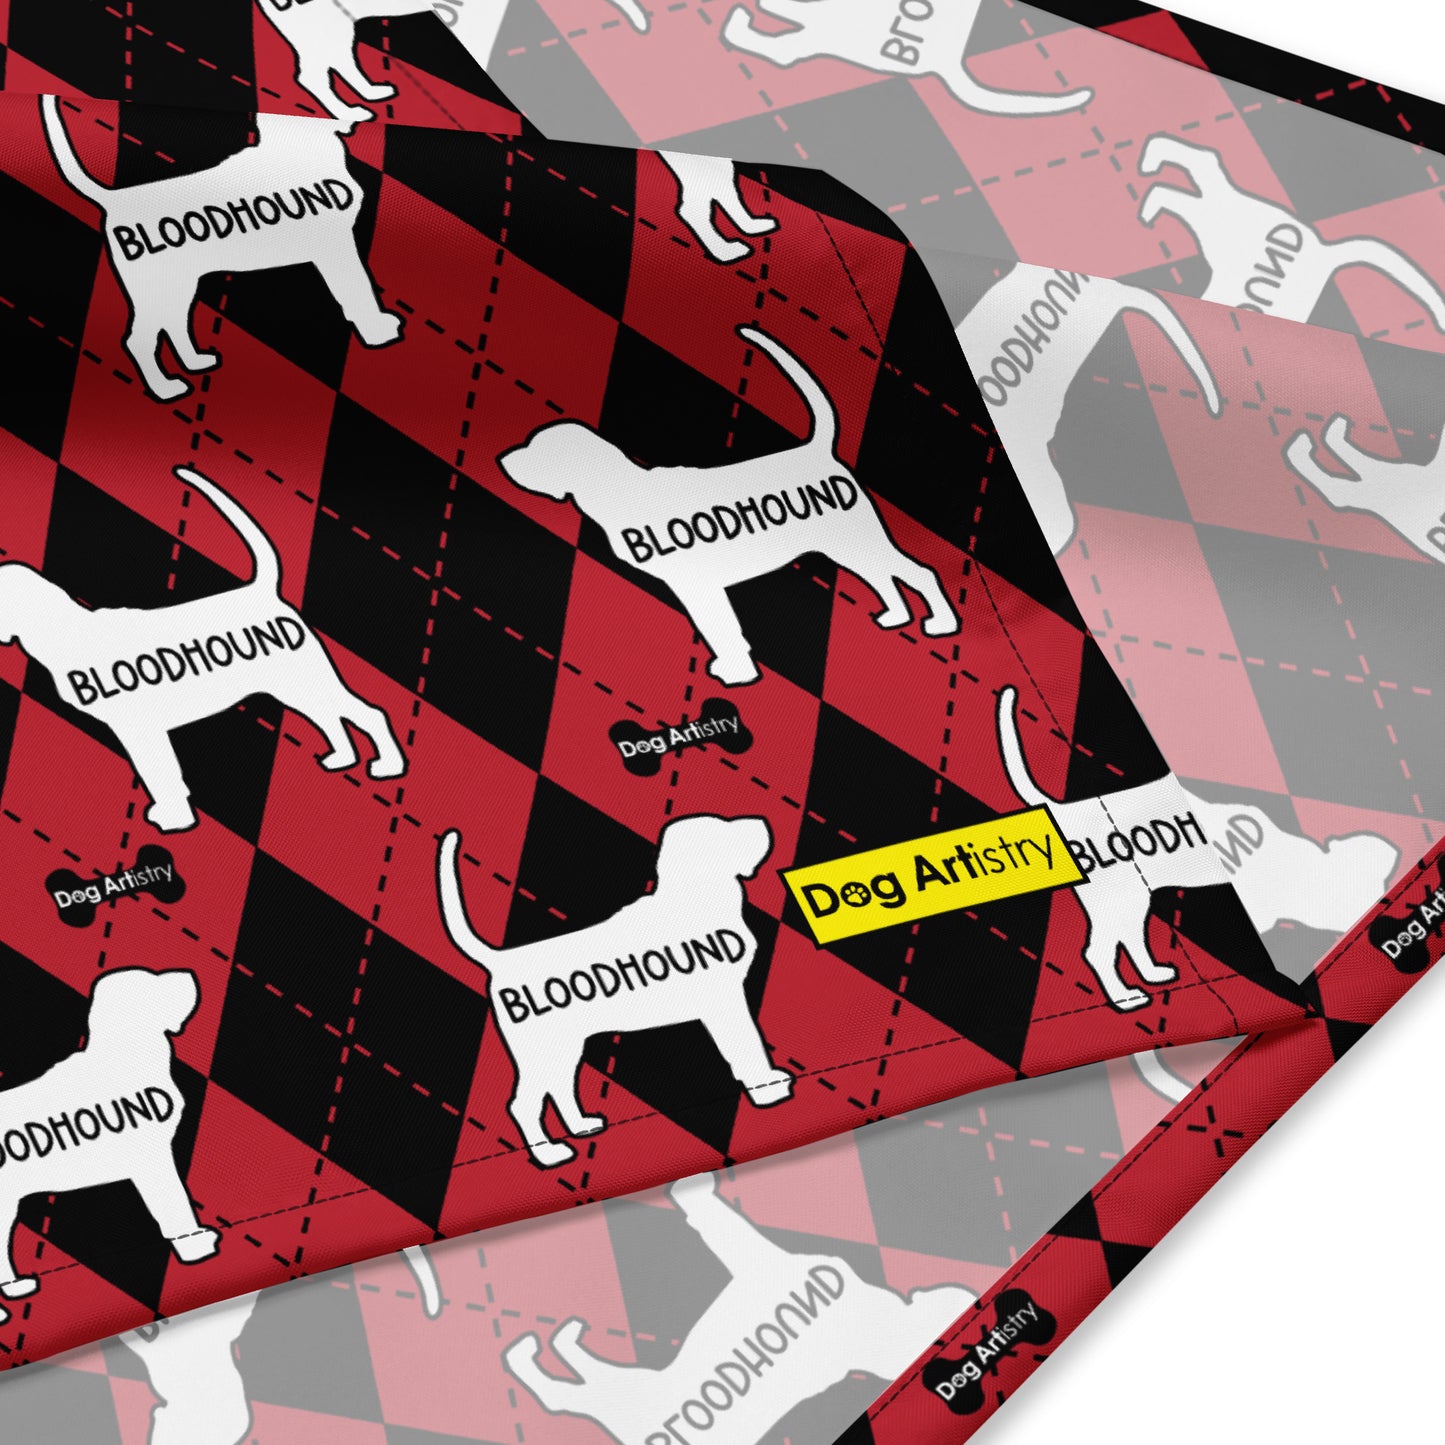 Bloodhound Argyle Red and Black All-over print bandana